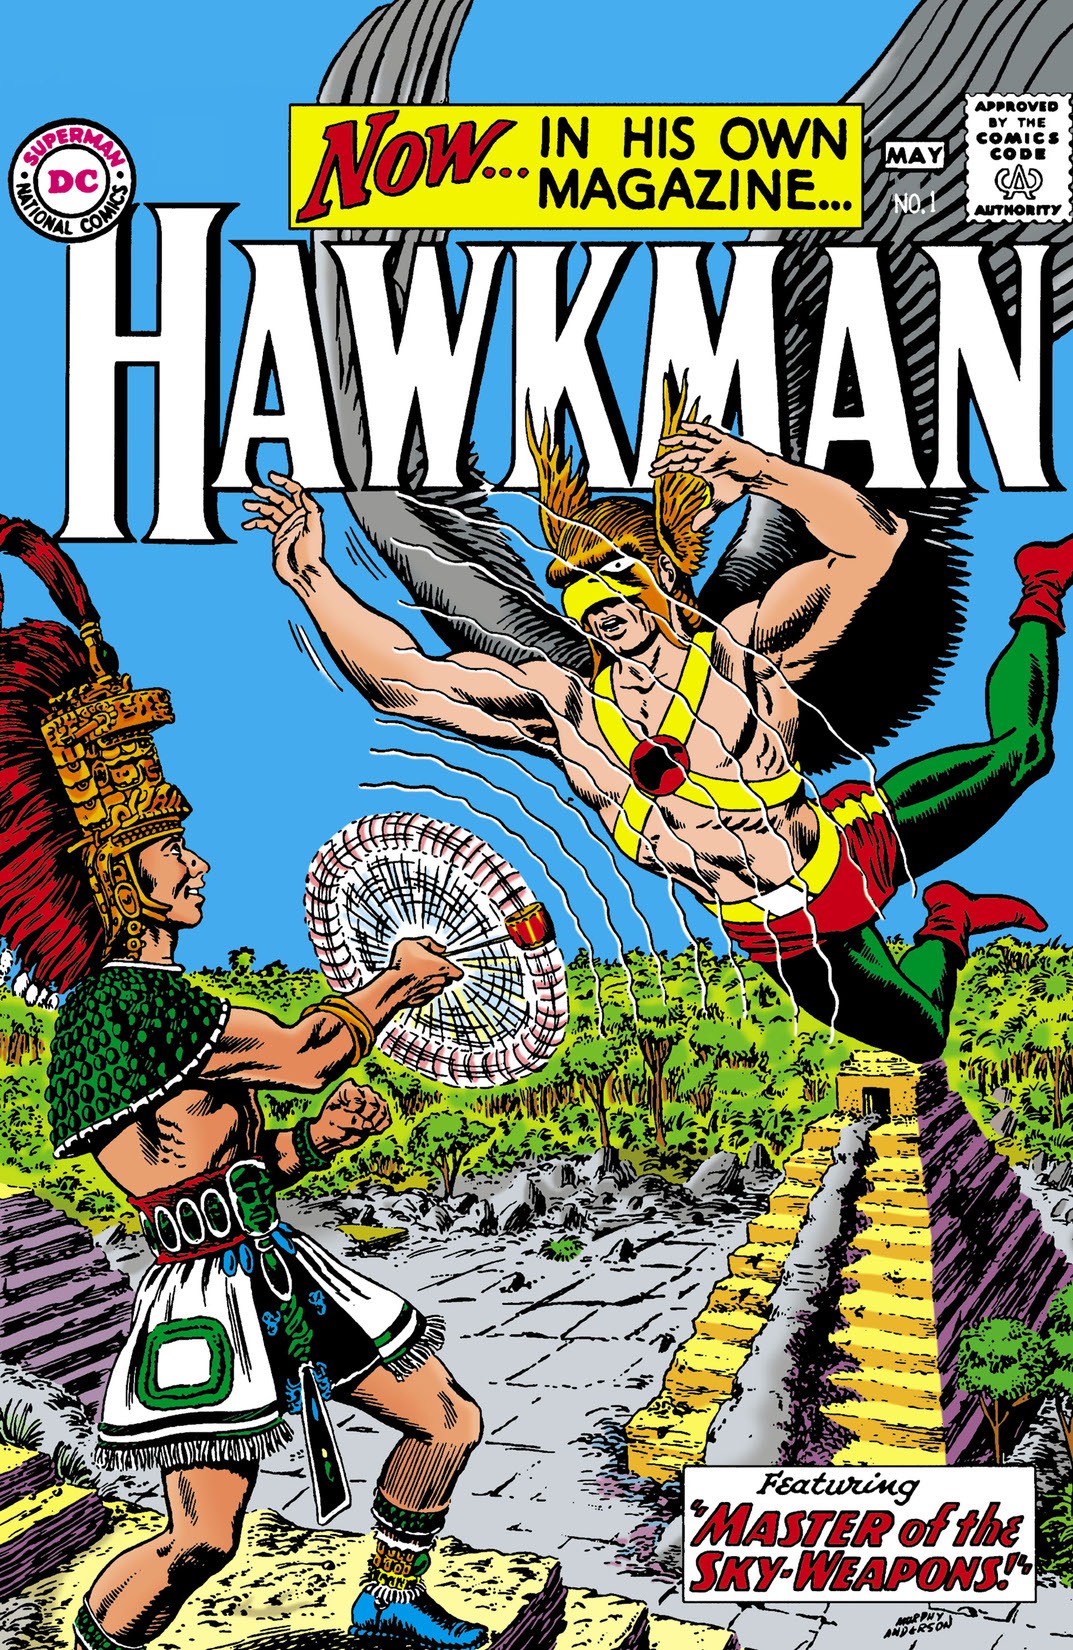 Hawkman (1964-) #1 preview images